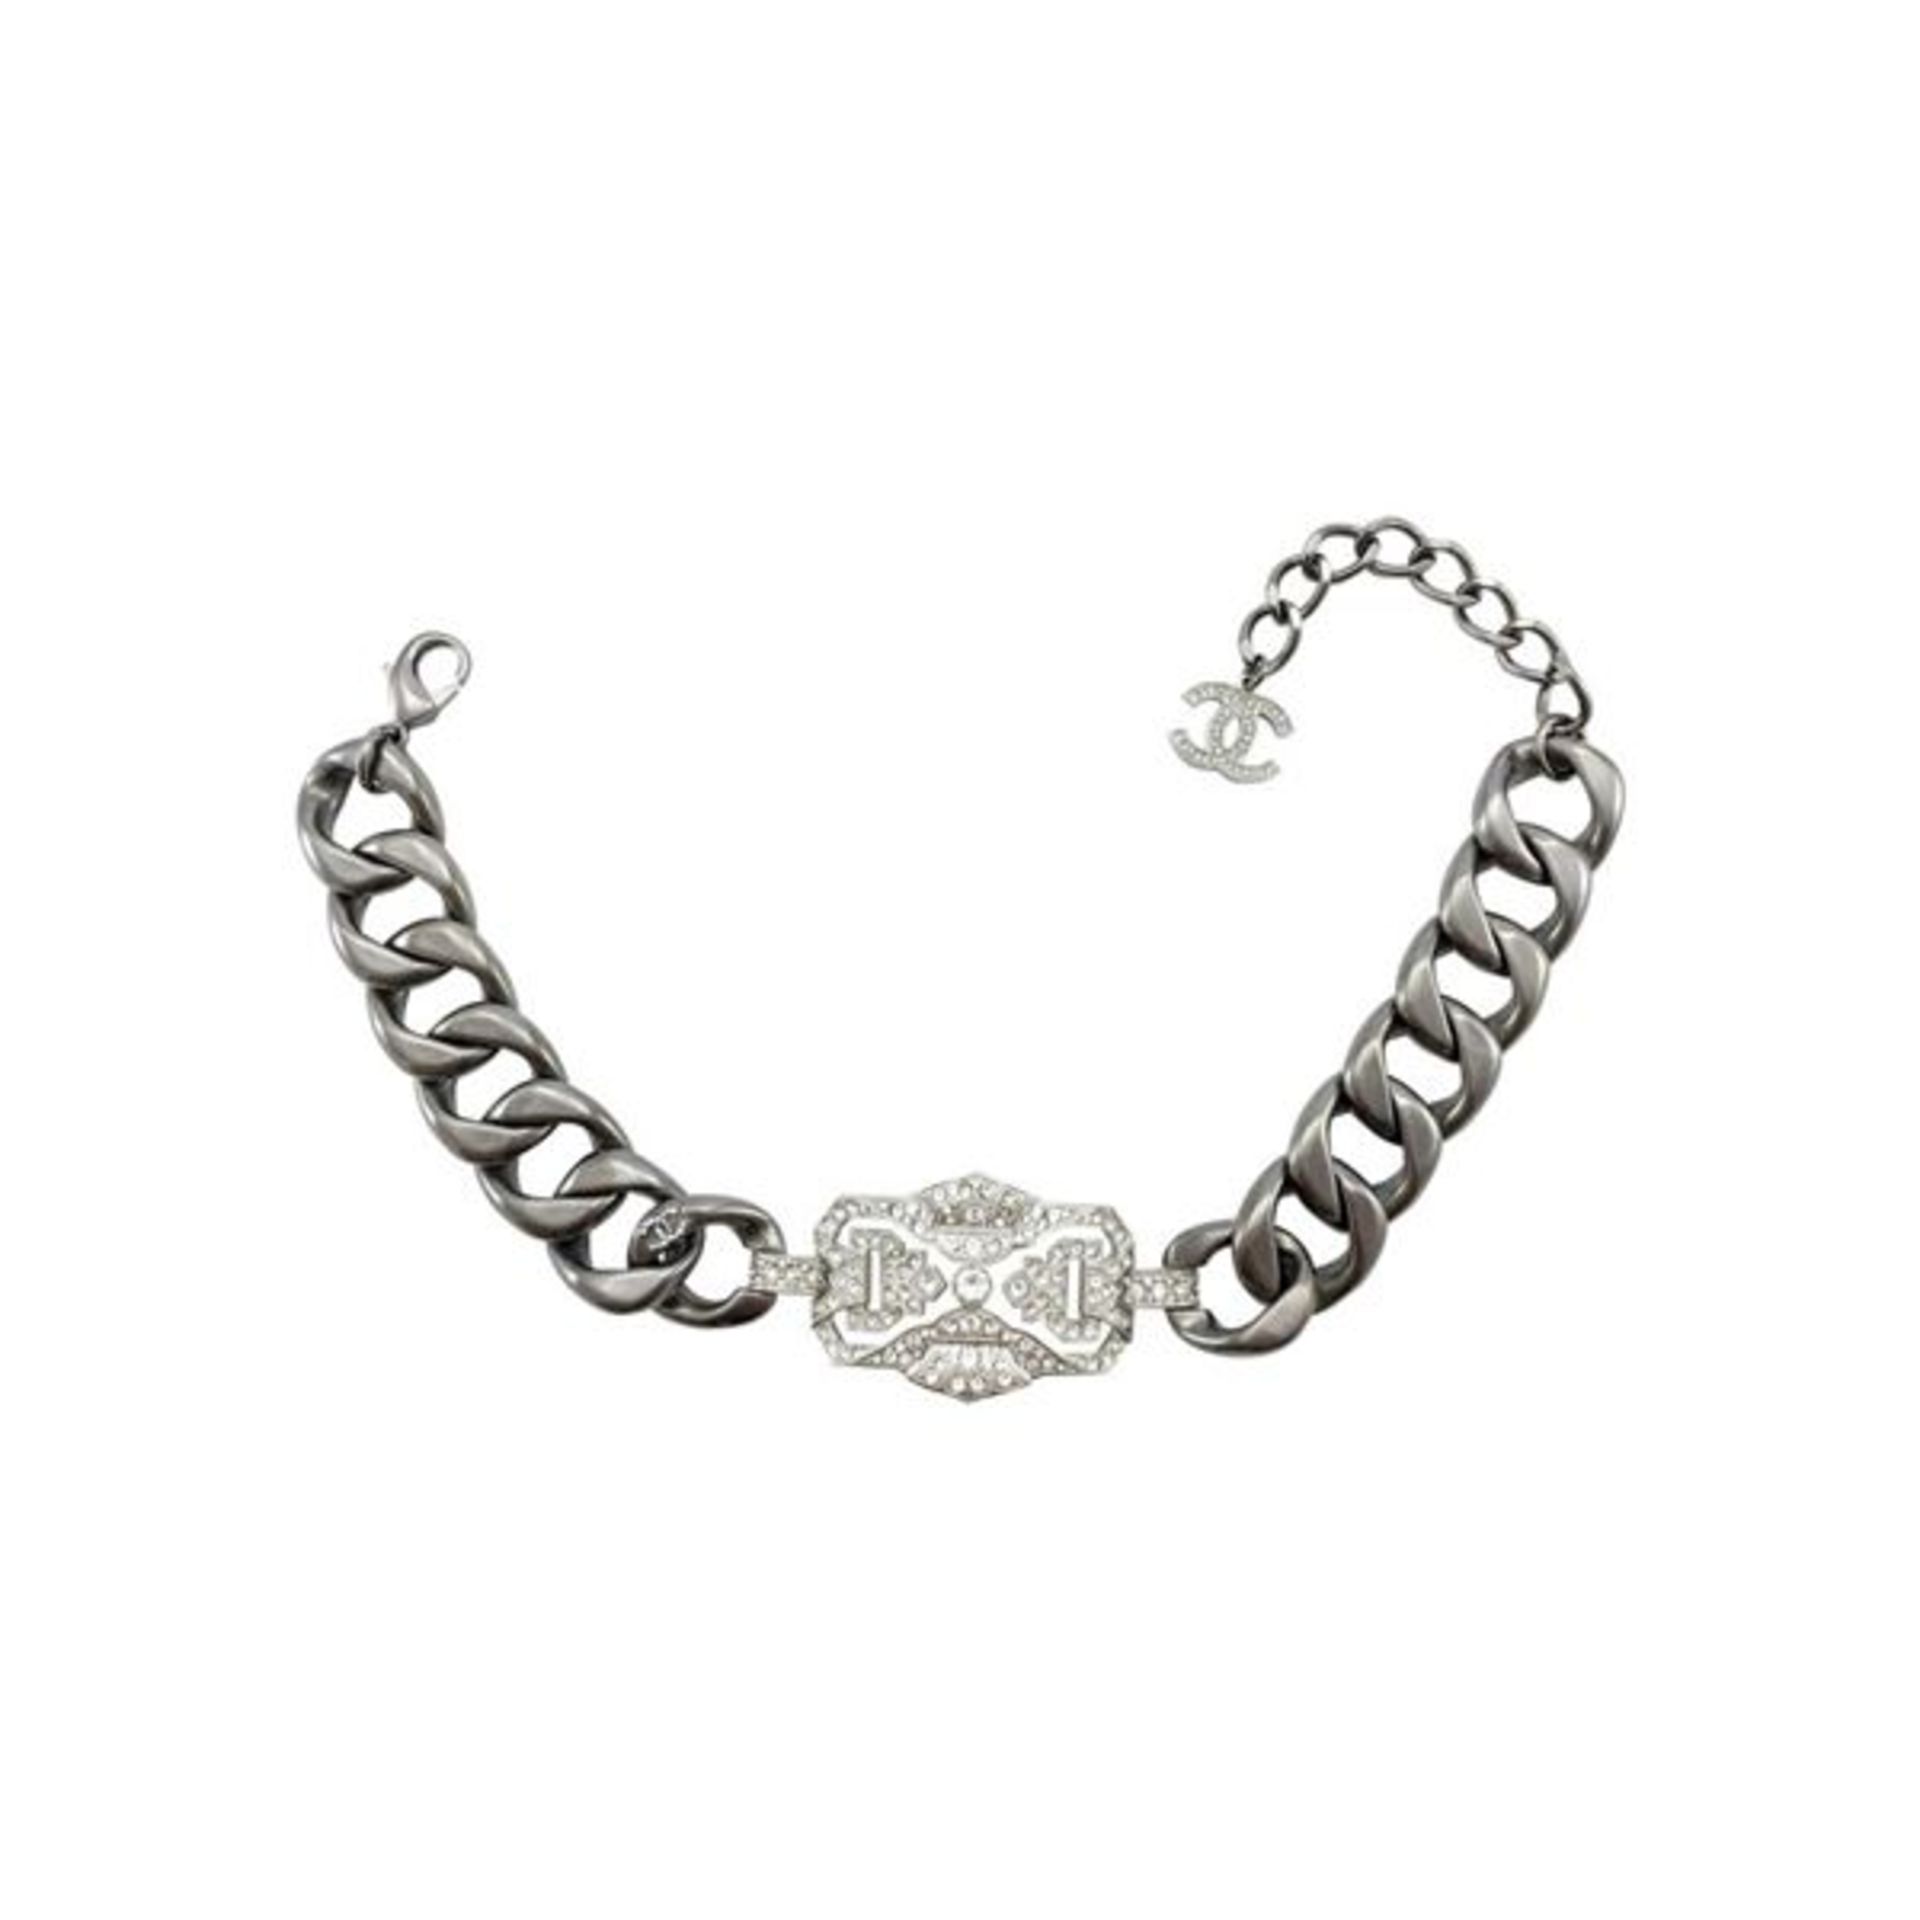 Chanel Runway Look Diamante Embellished Grey Chunky Chain Choker Necklace, 2014 - Image 4 of 8